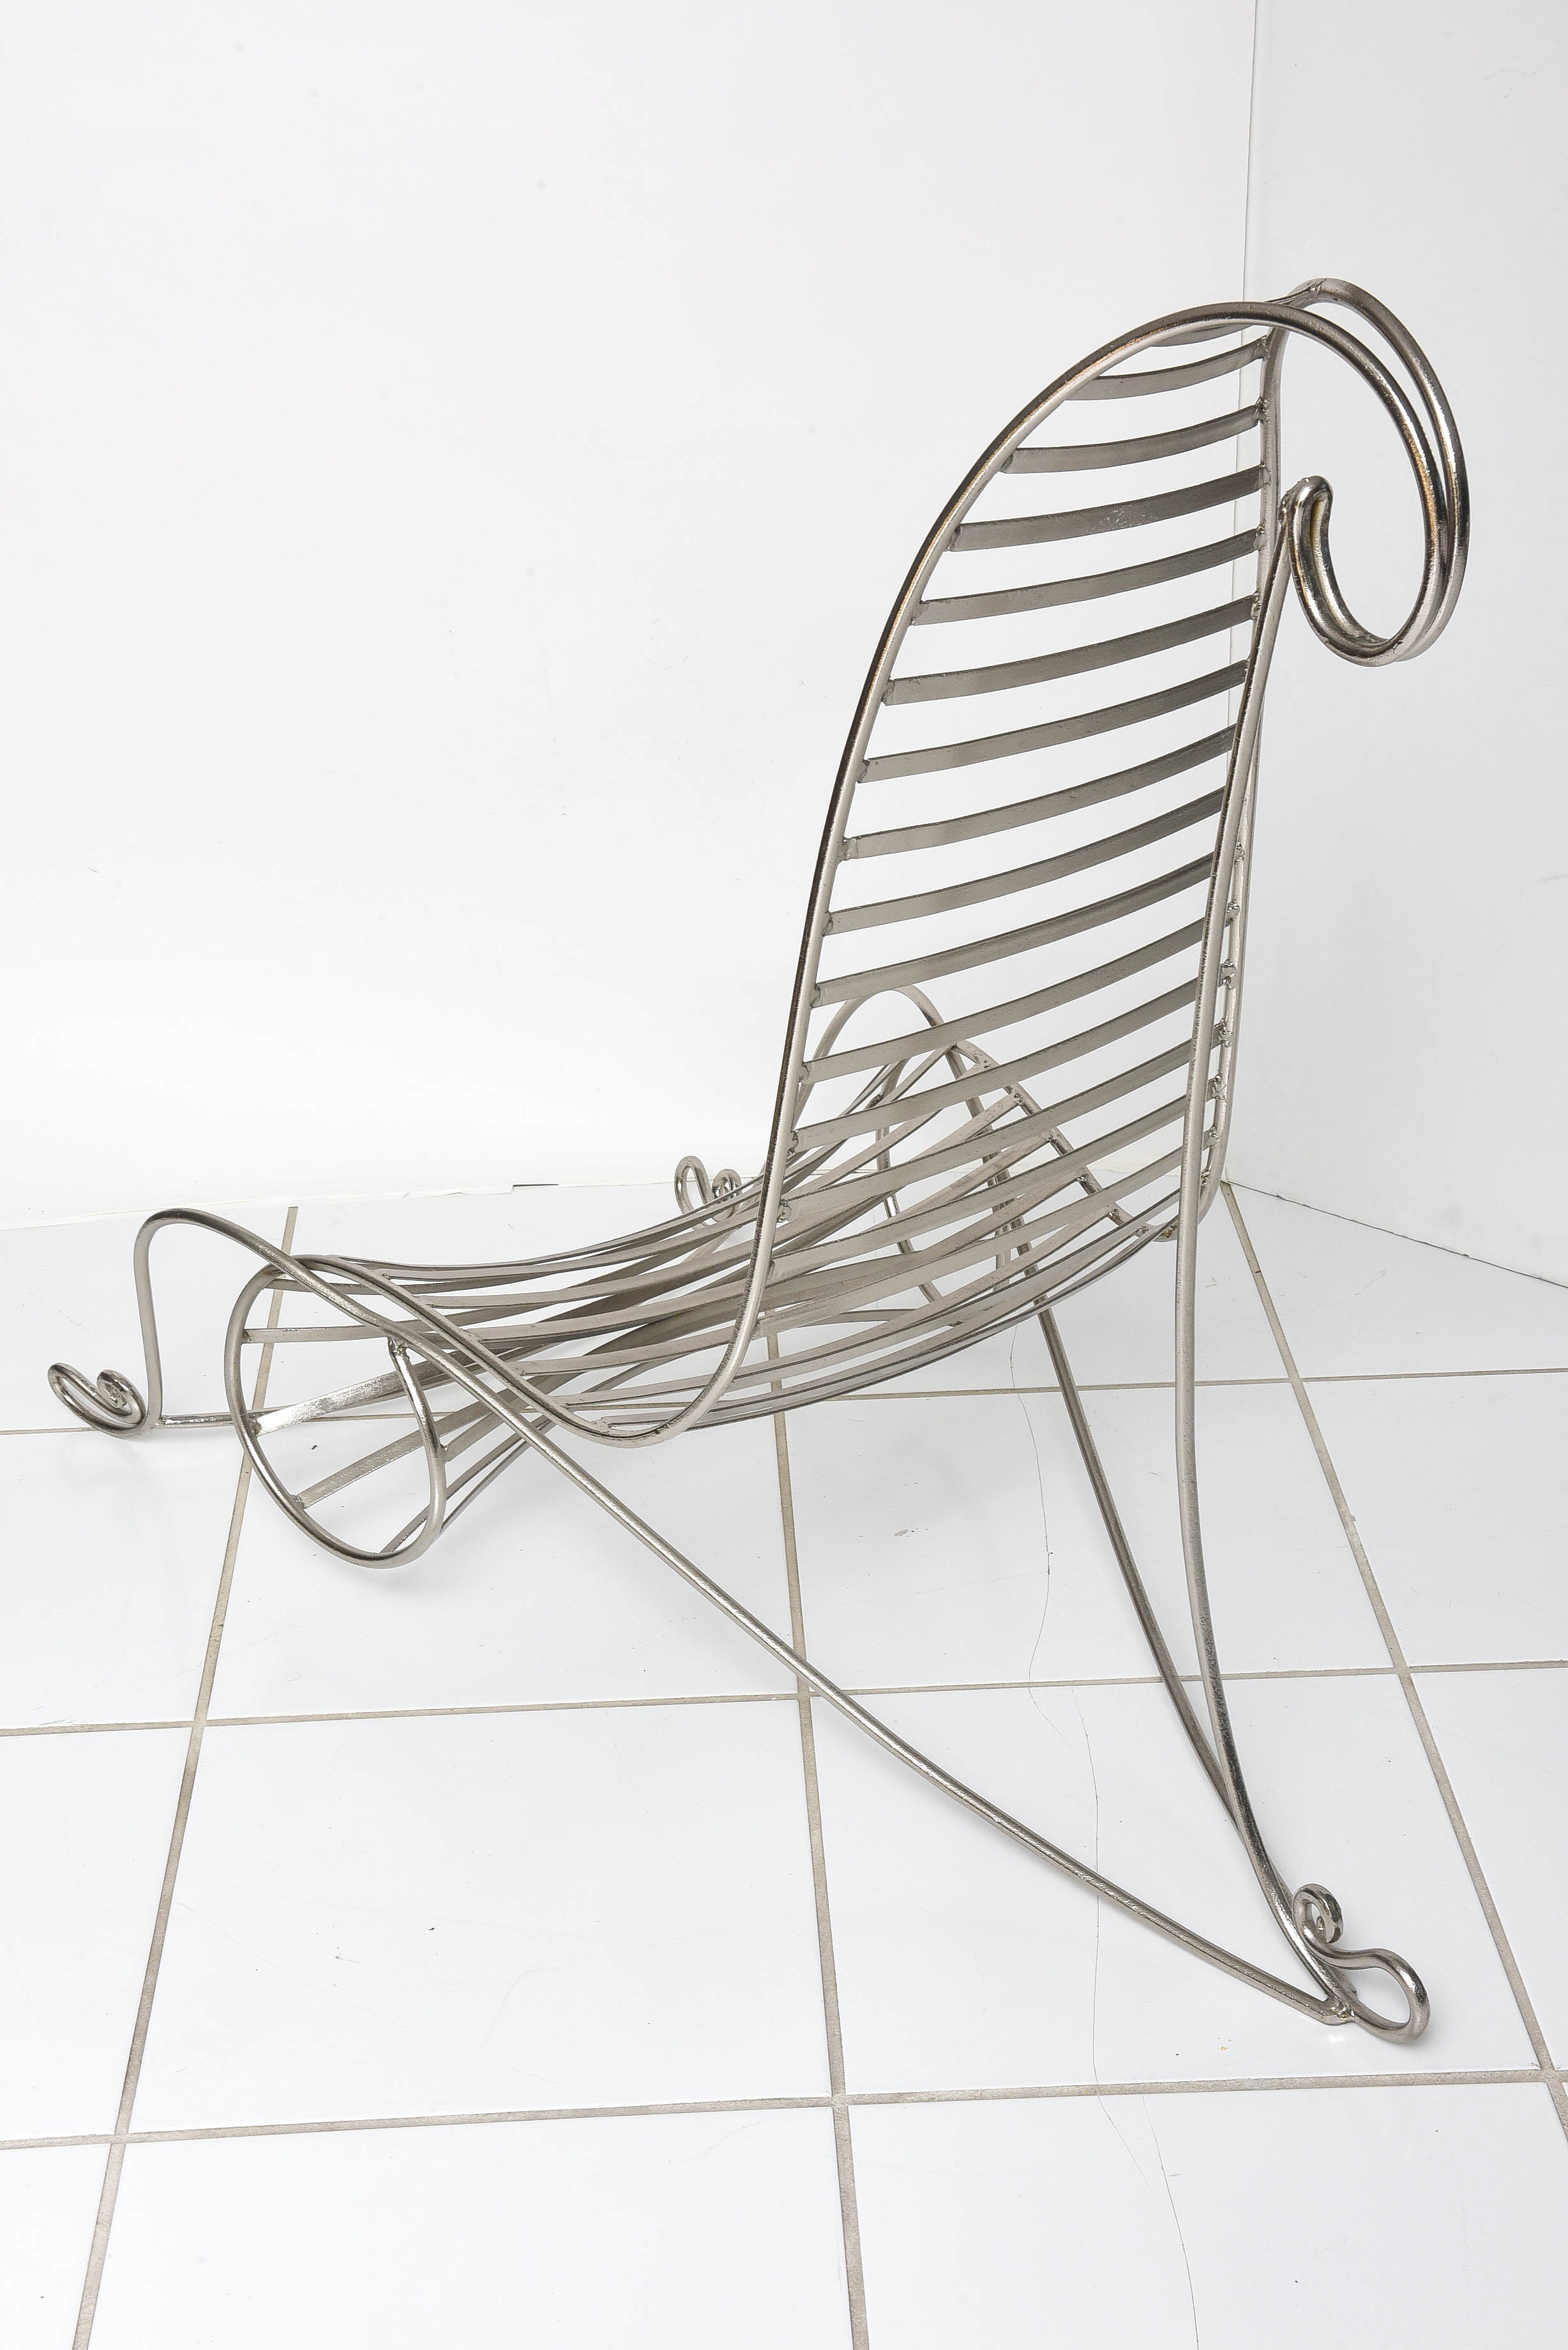 Chrome Chair in the Style of the Spine Chair after André Dubreuil, circa 1990s For Sale 1